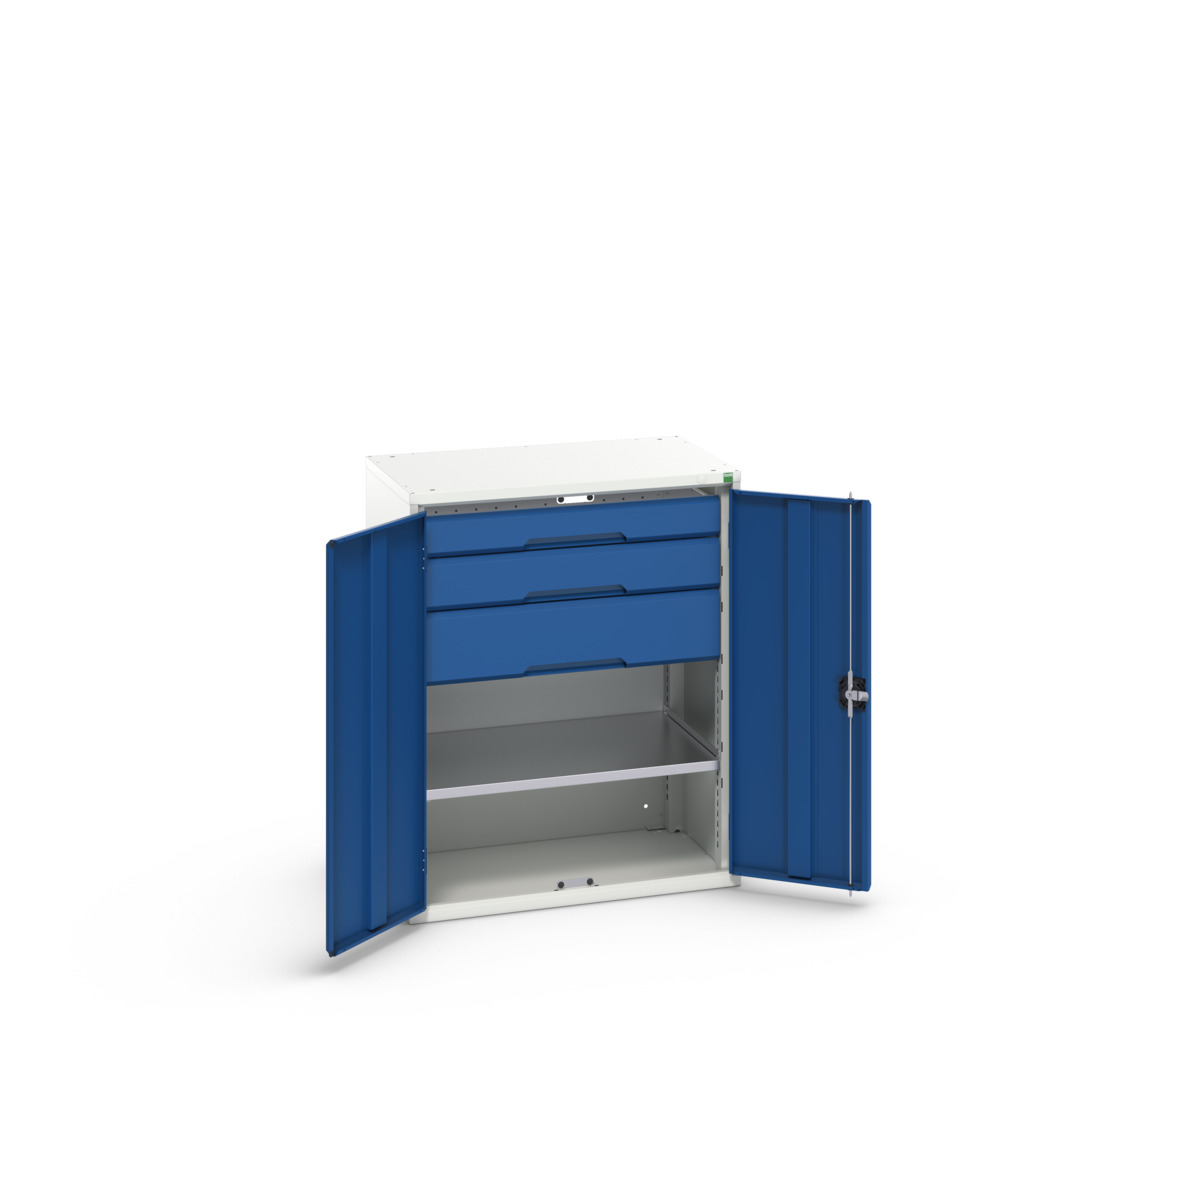 16926454.11 - verso kitted cupboard